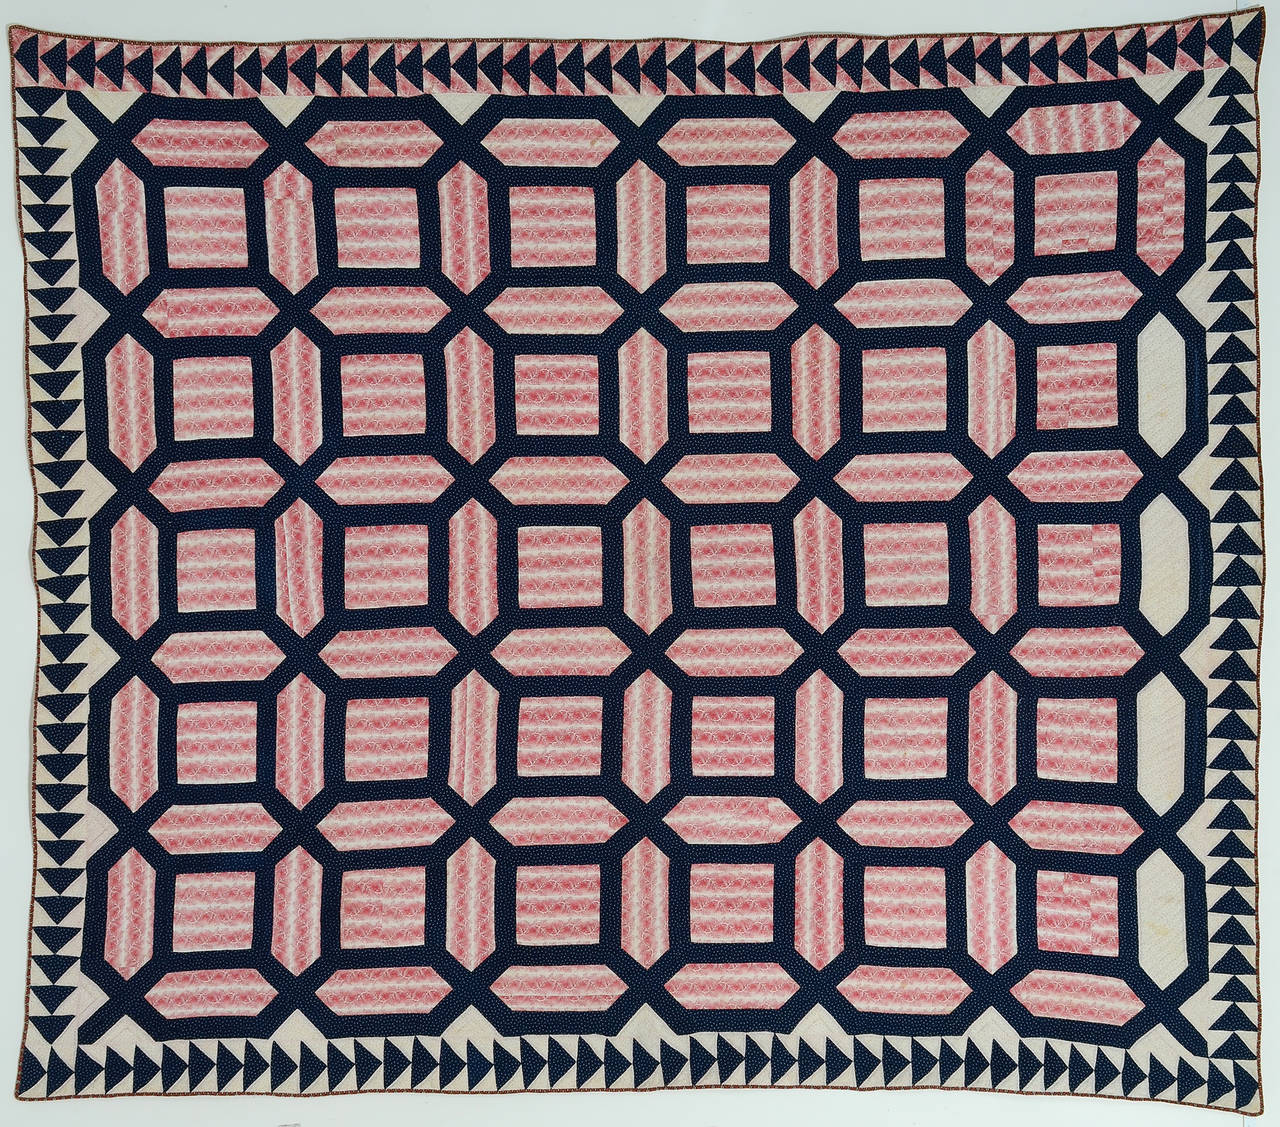 This early garden maze quilt is done with the richest of colors. The deep indigo is beautifully offset by the wonderful and unusual rose printed fabric. It is nicely quilted with circles in the center of each block. The wild goose chase border